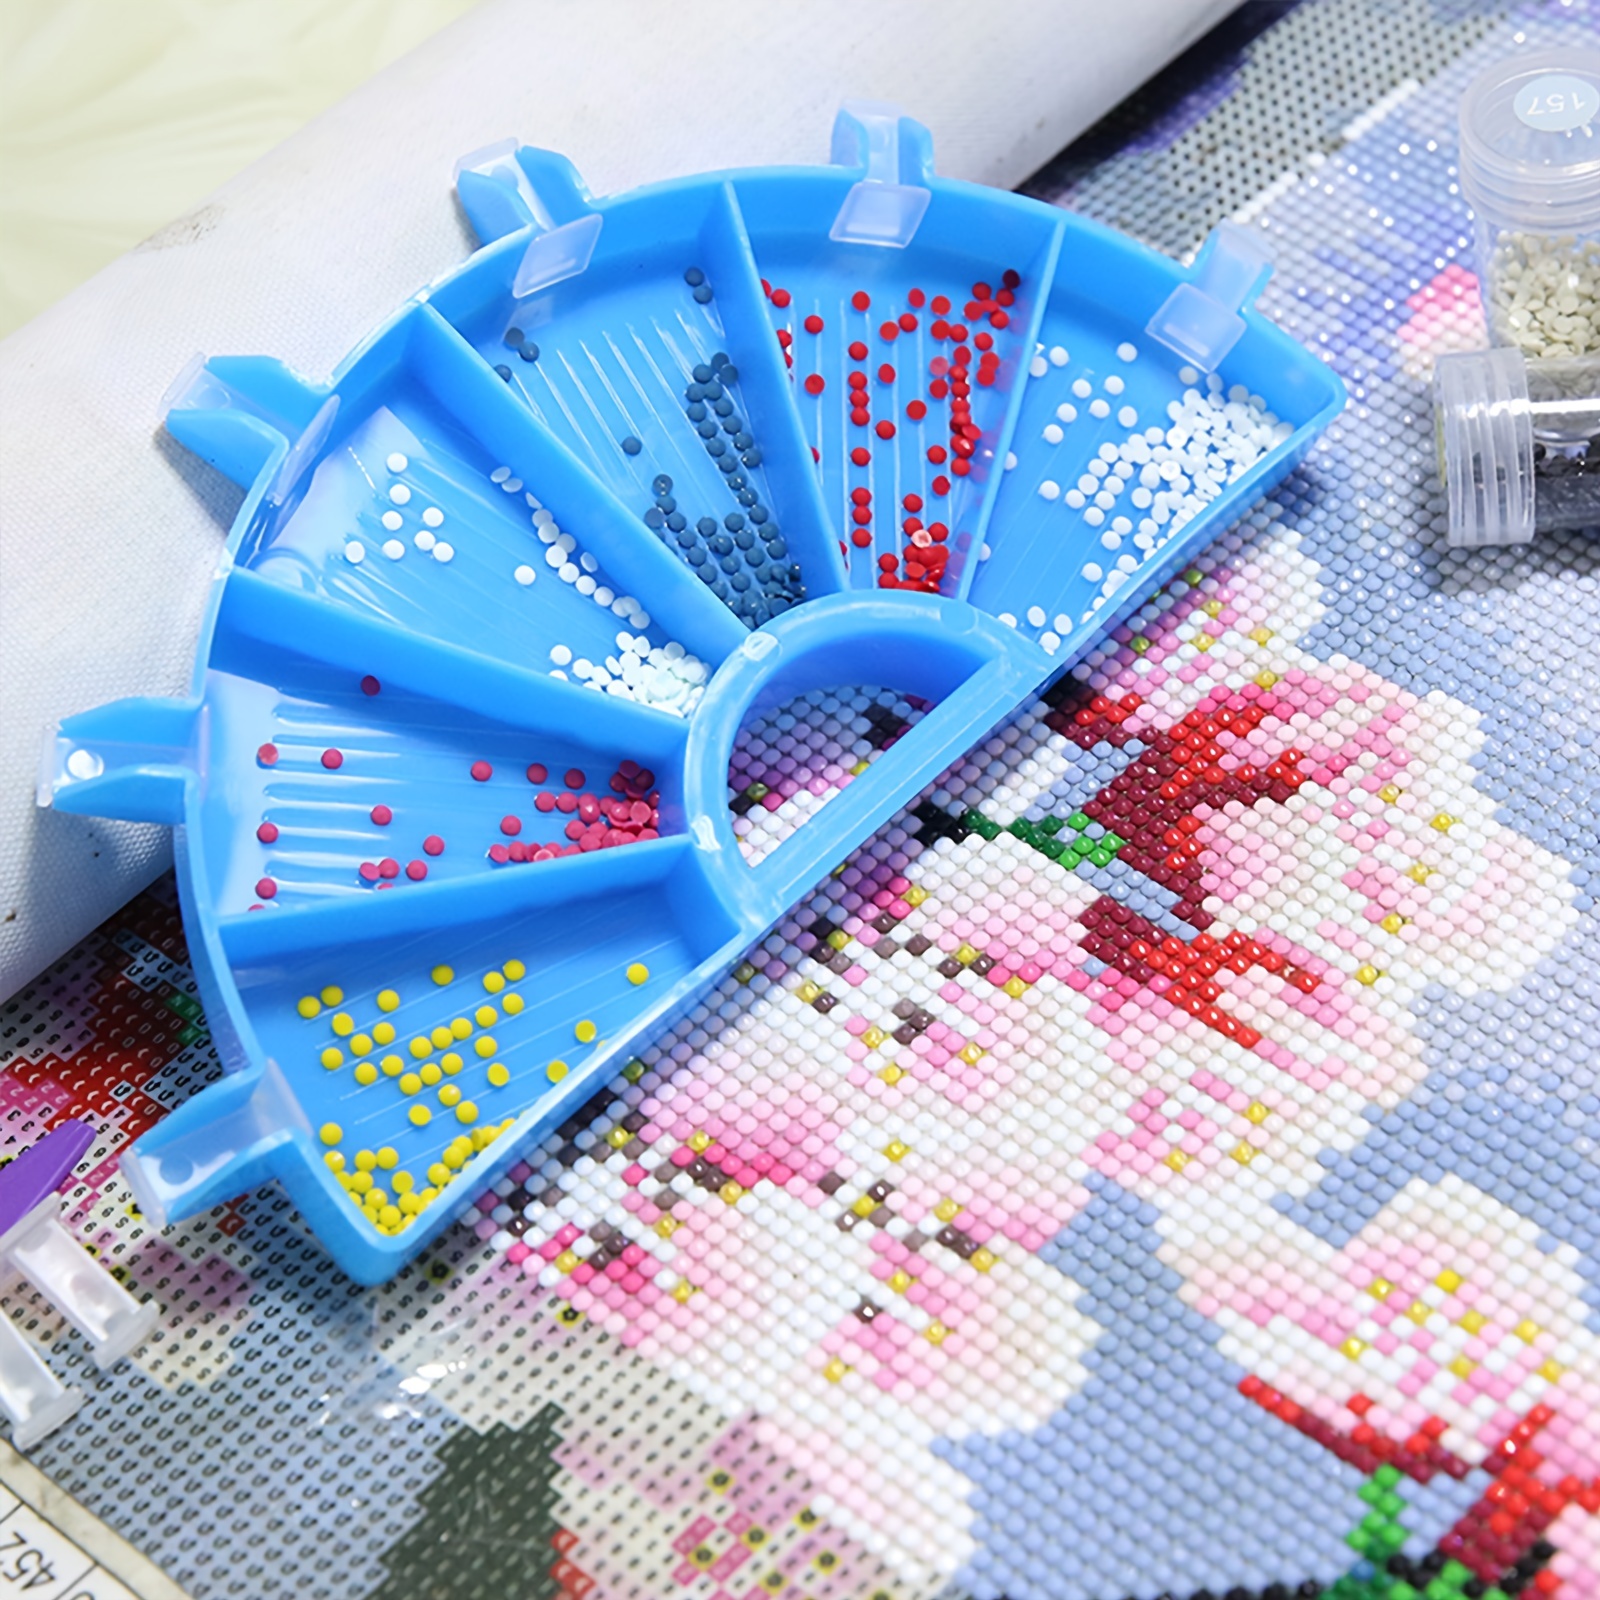 Qingsi 12 Pcs Diamond Painting Accessories Tray Organizer Art Painting Bead  Sorting containers for DIY Crafts /Glitter /Rhinestones/ Diamond Embroidery